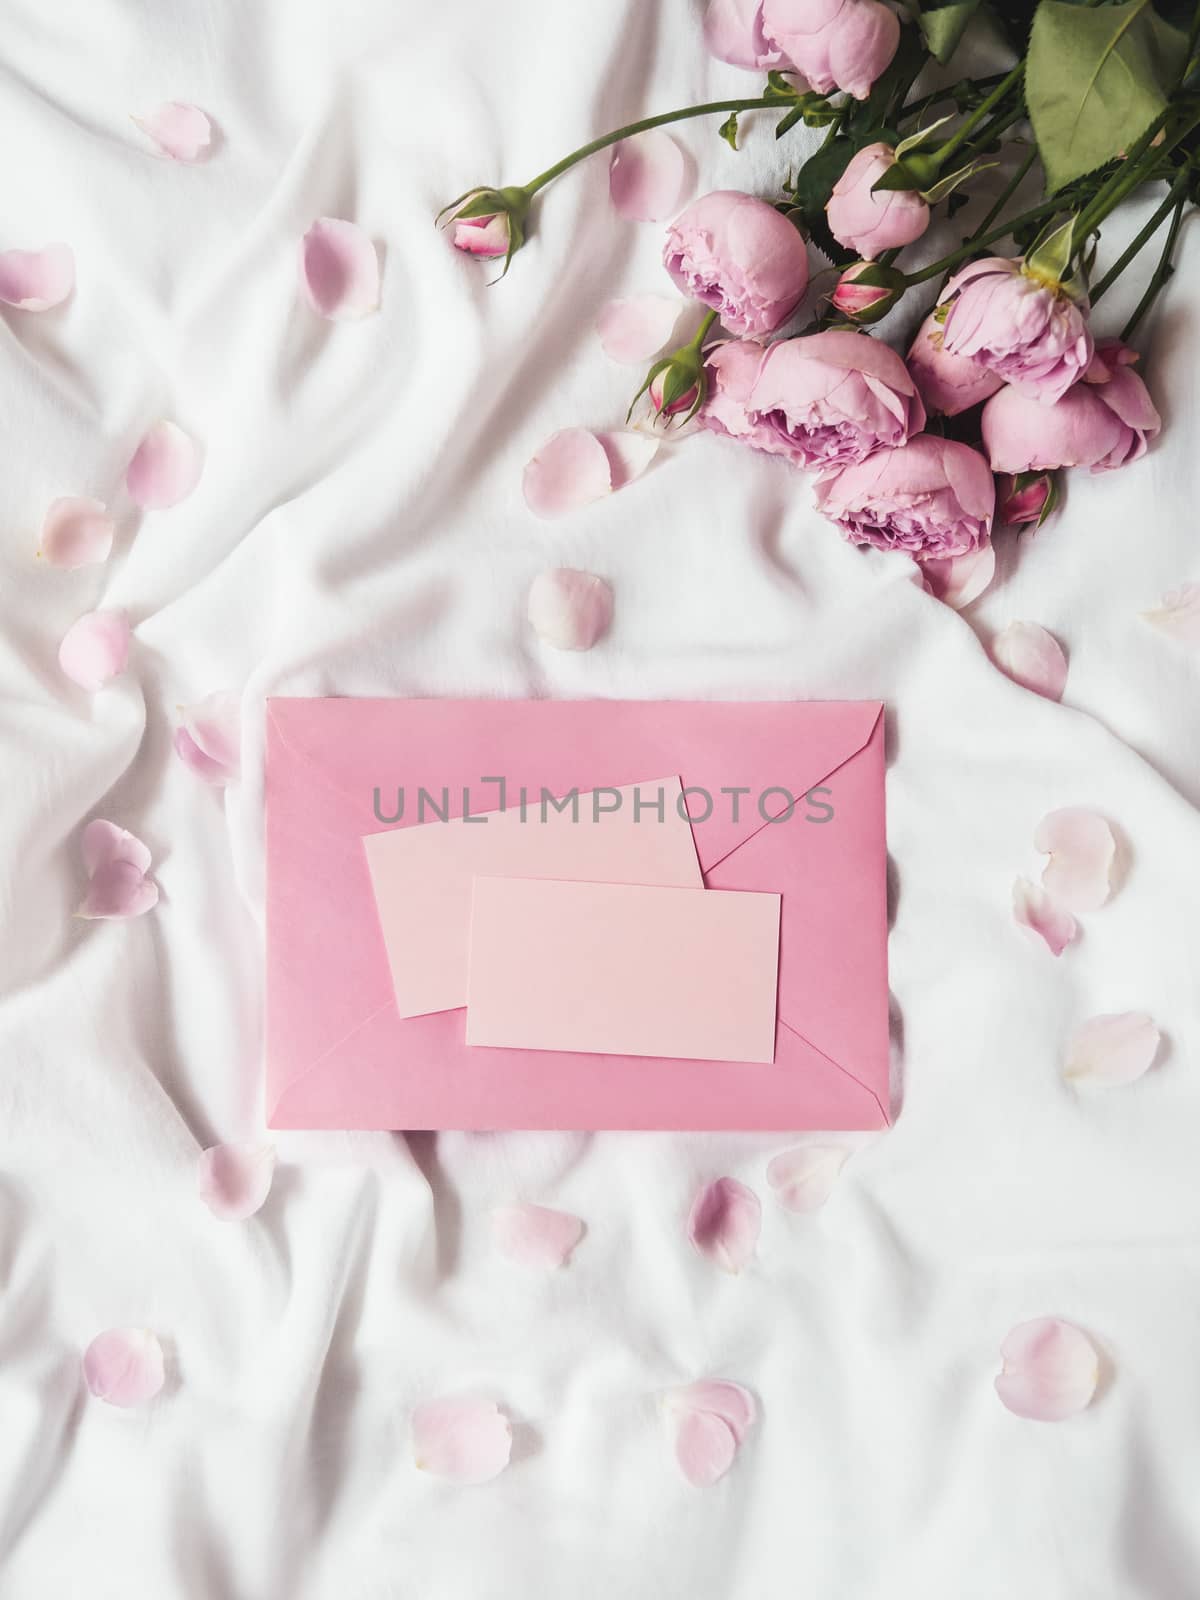 Roses and petals on crumpled white fabric. Natural elegant decoration. Romantic background with copy space on pink envelope and visit cards. Top view, flat lay.